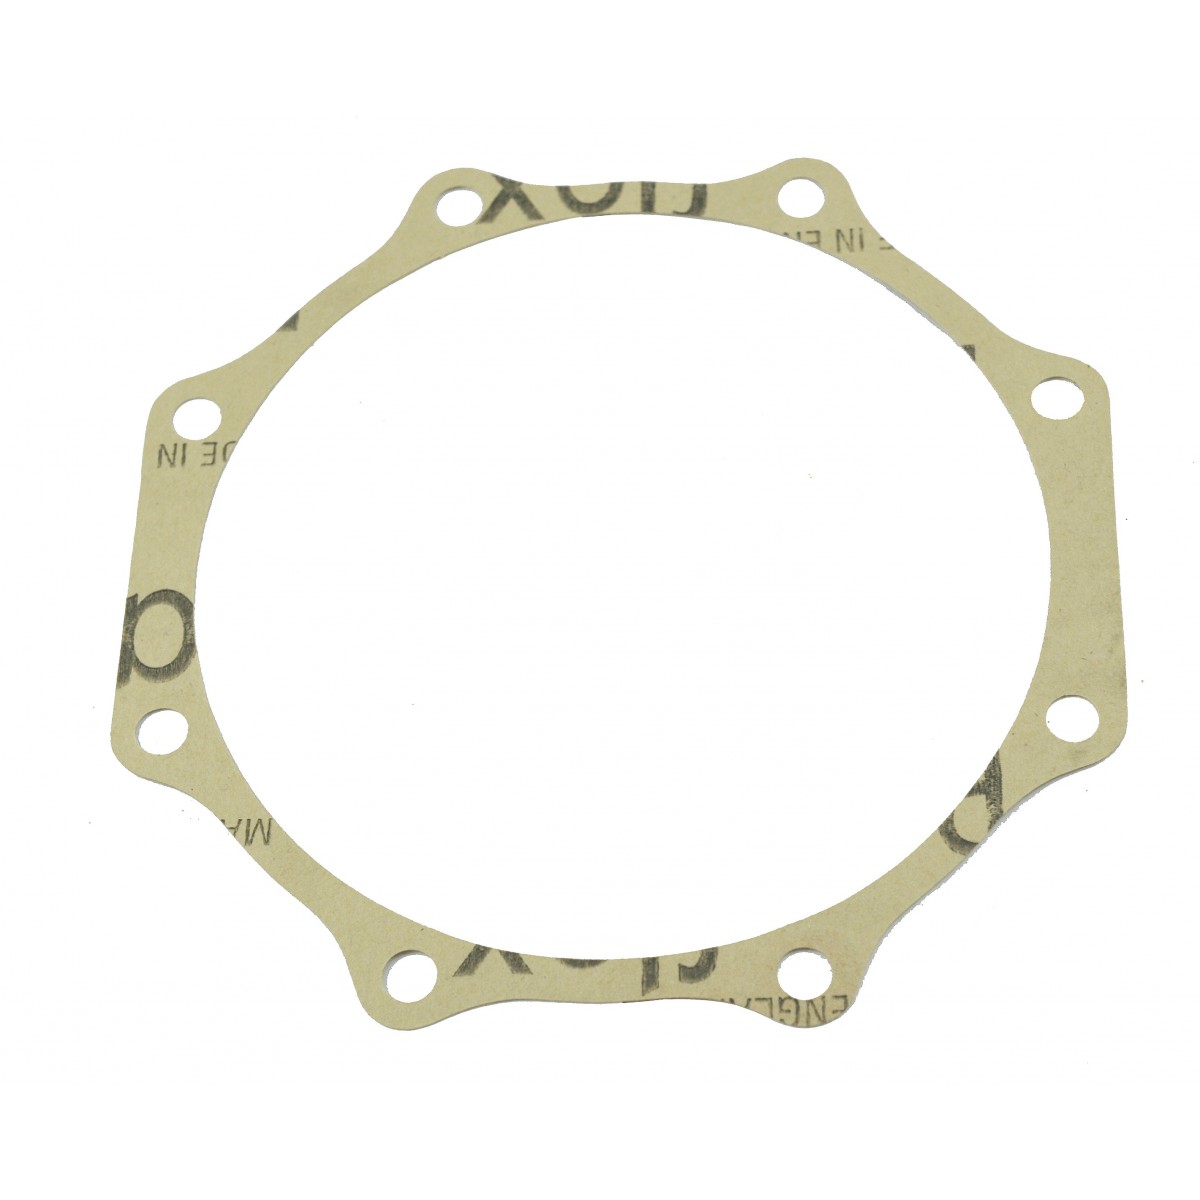 Central gasket A / B 152x0,4 front axle Mitsubishi VST MT180 / 224/270